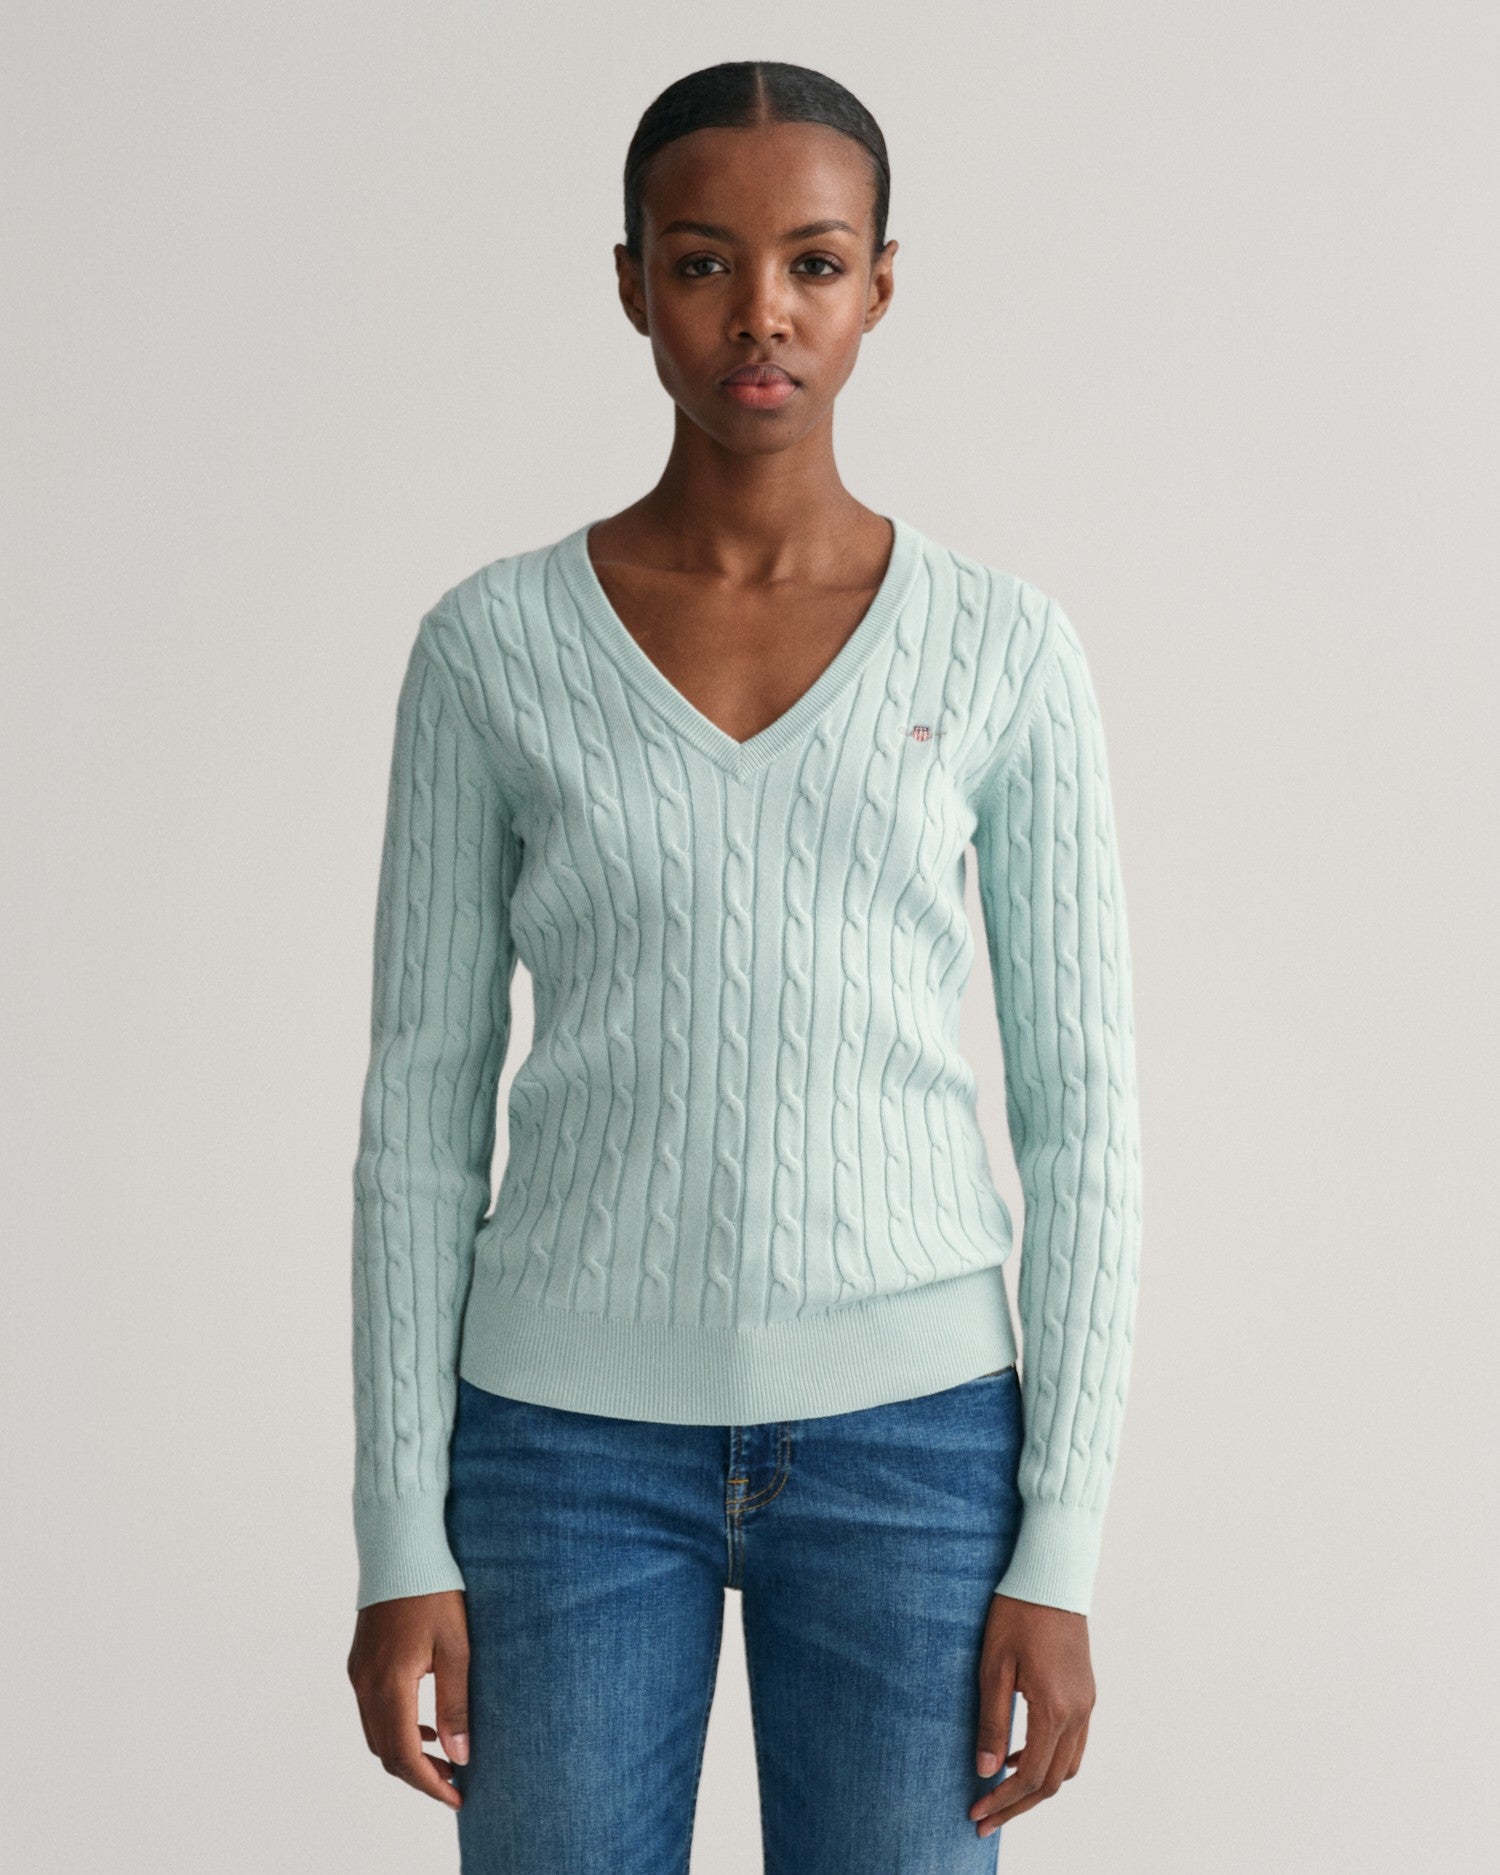 Gant Cable Knit Jumper Turquoise